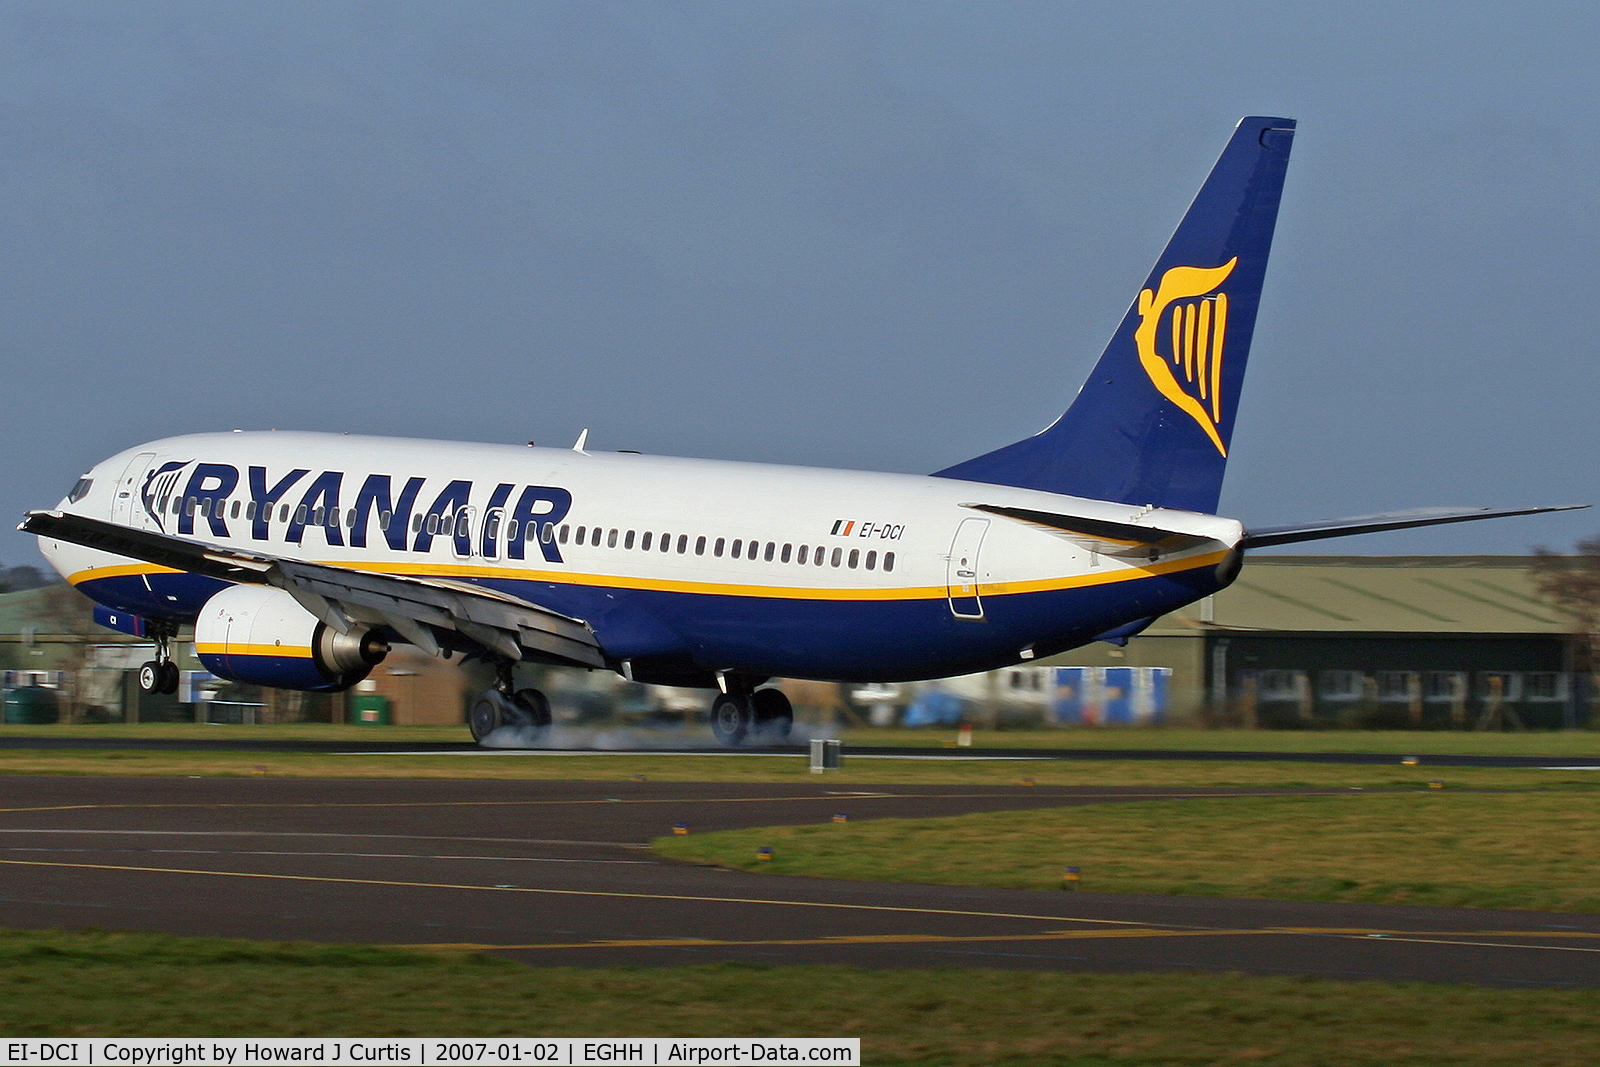 EI-DCI, 2004 Boeing 737-8AS C/N 33567, Ryanair (pre winglets), at the moment of touchdown.